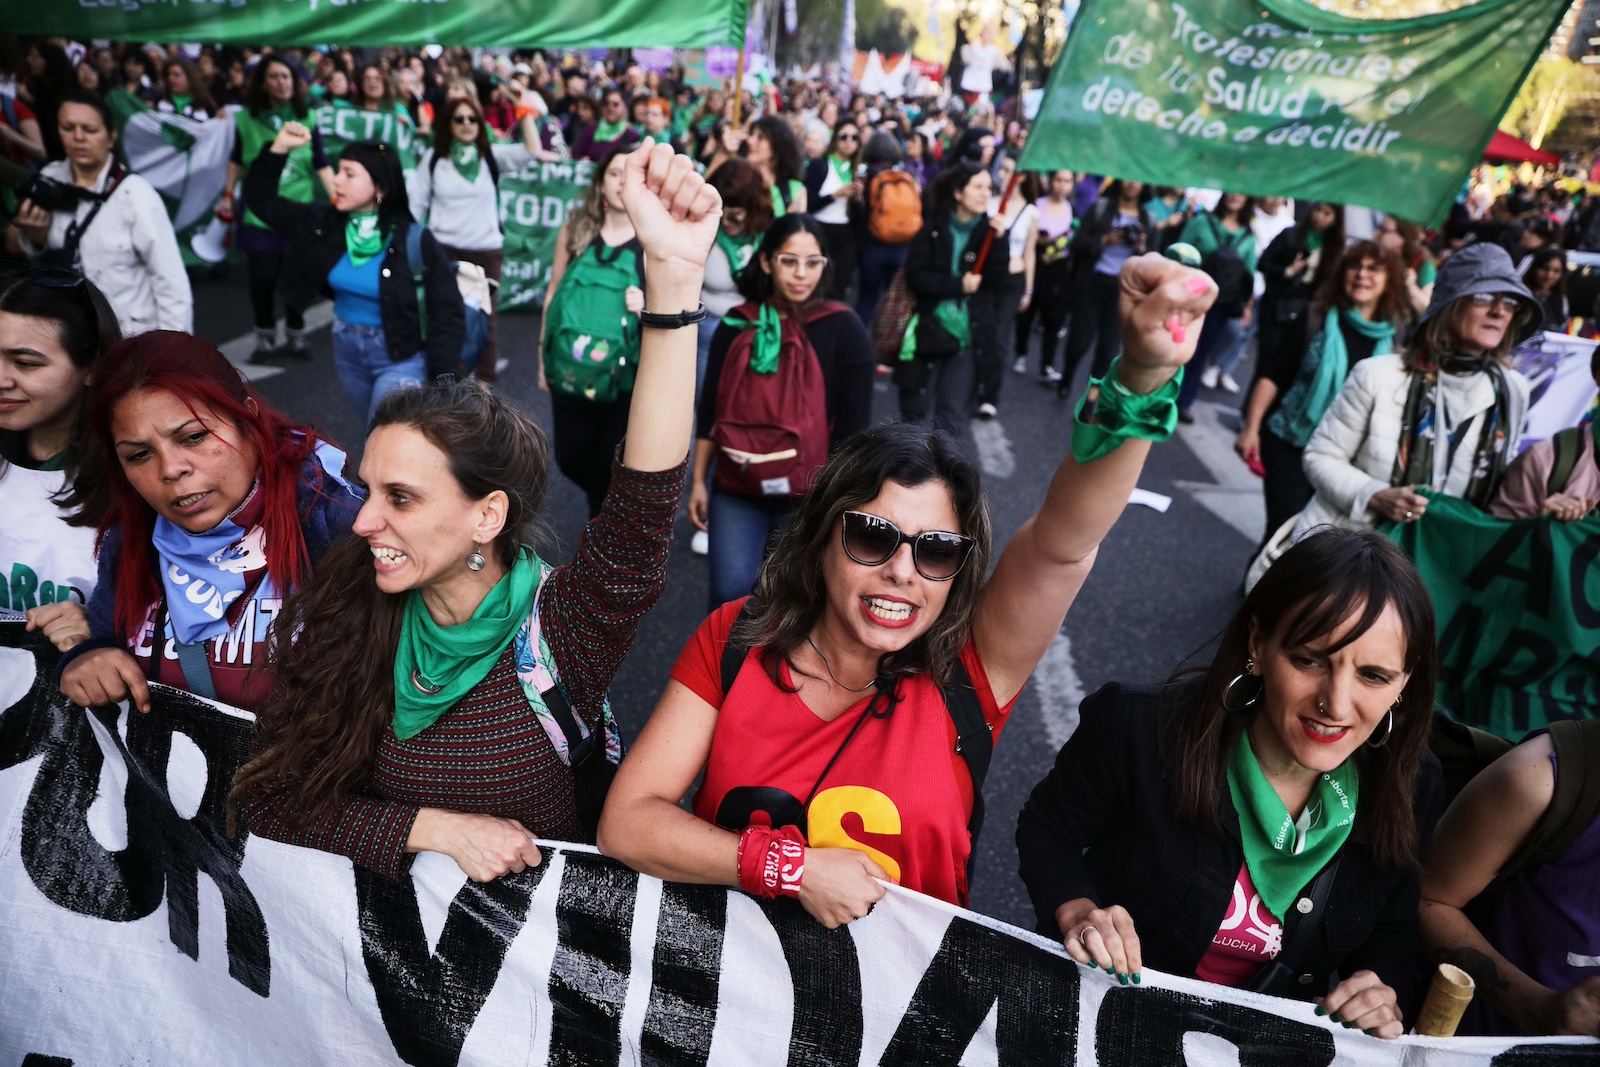 feminist organizations take part in a march in defense of legal abortion